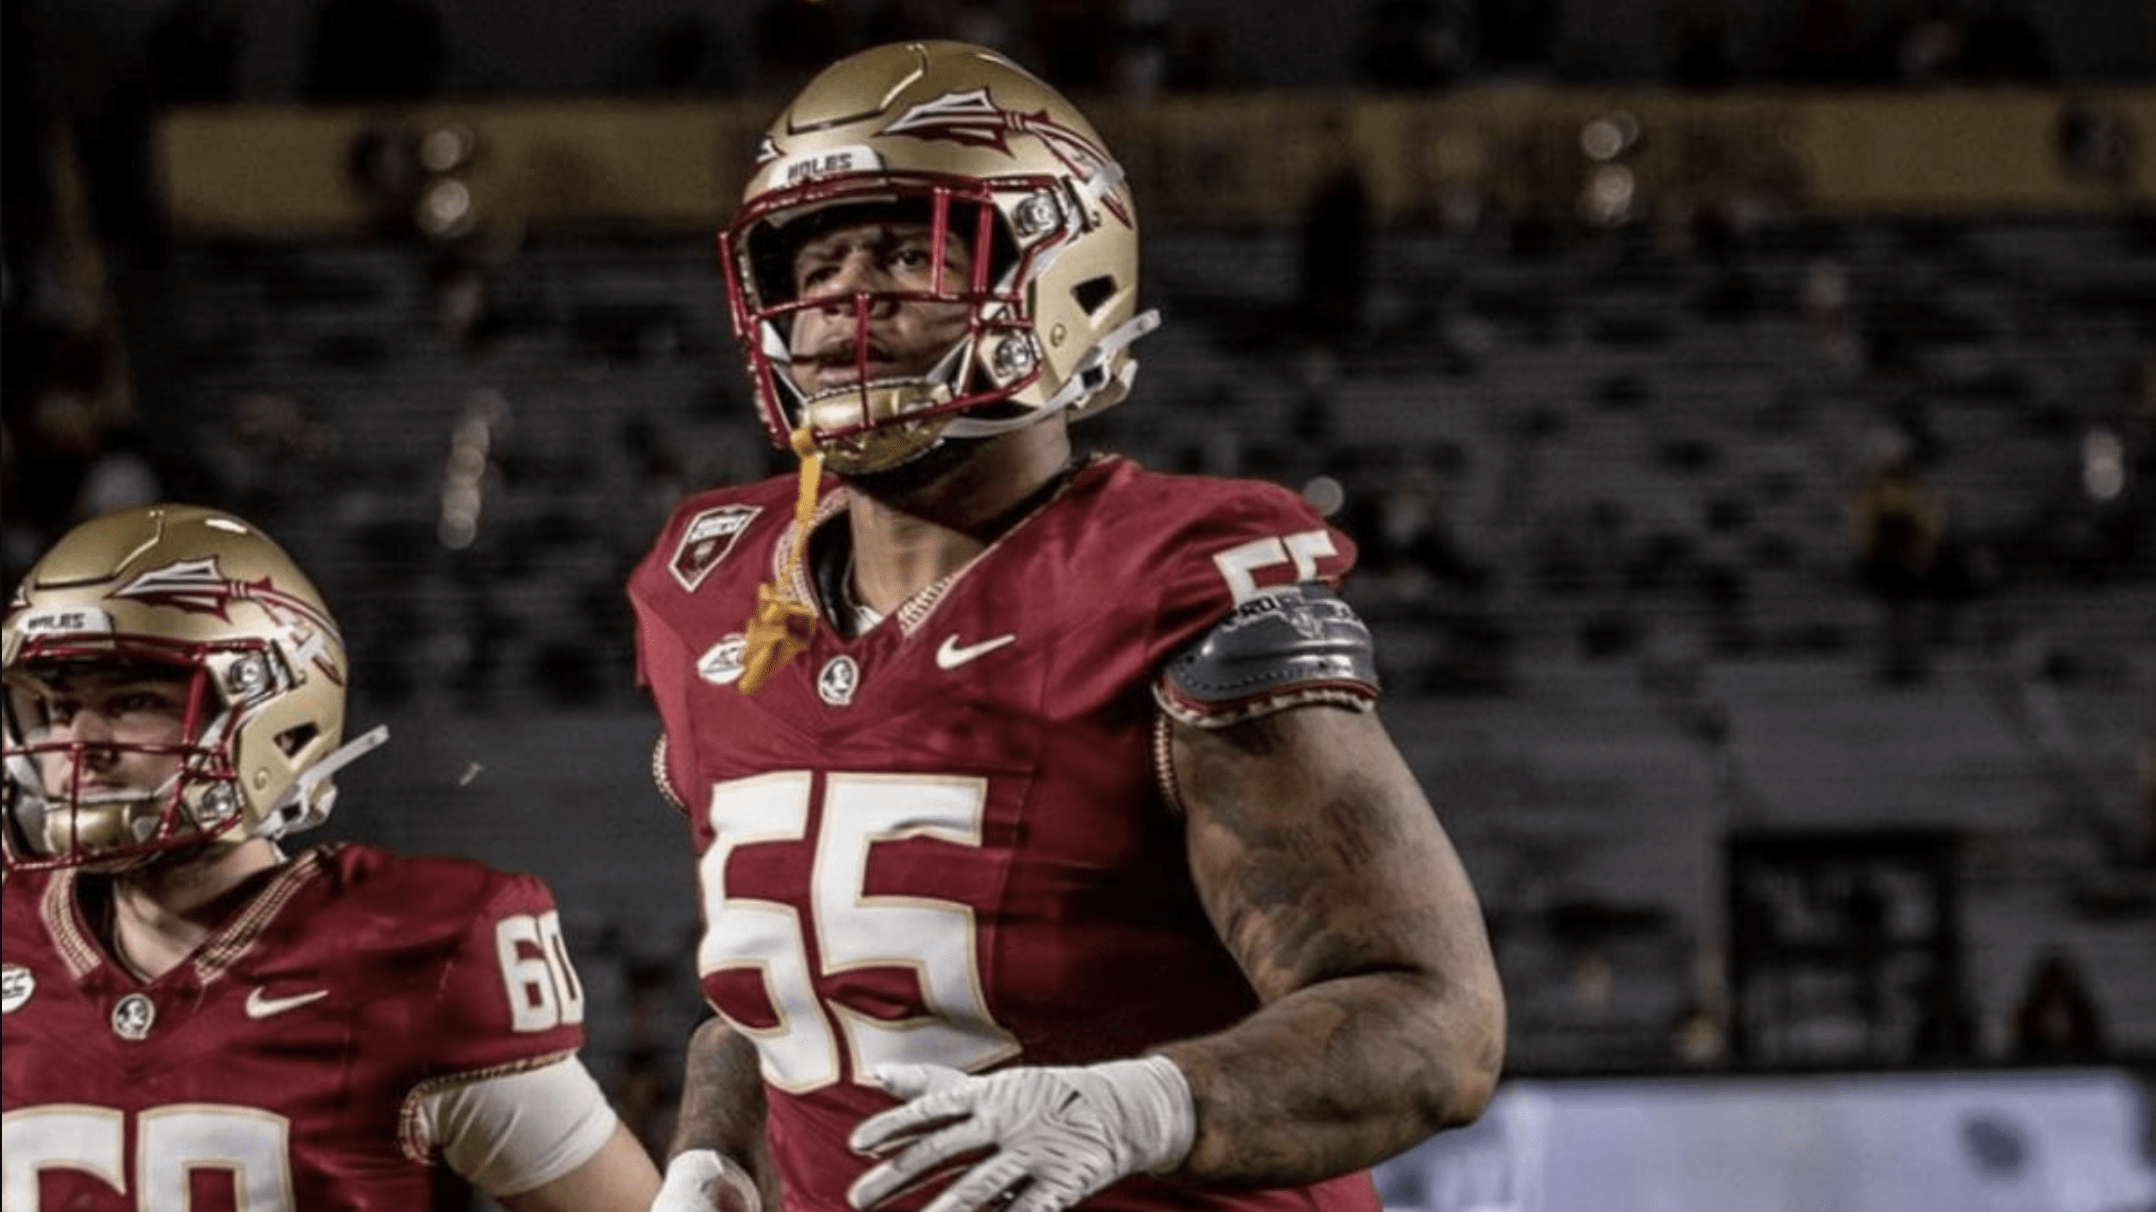 Former FSU Offensive Lineman Qae’Shon Sapp Transfers to SMU, Will Face Florida State in 2024